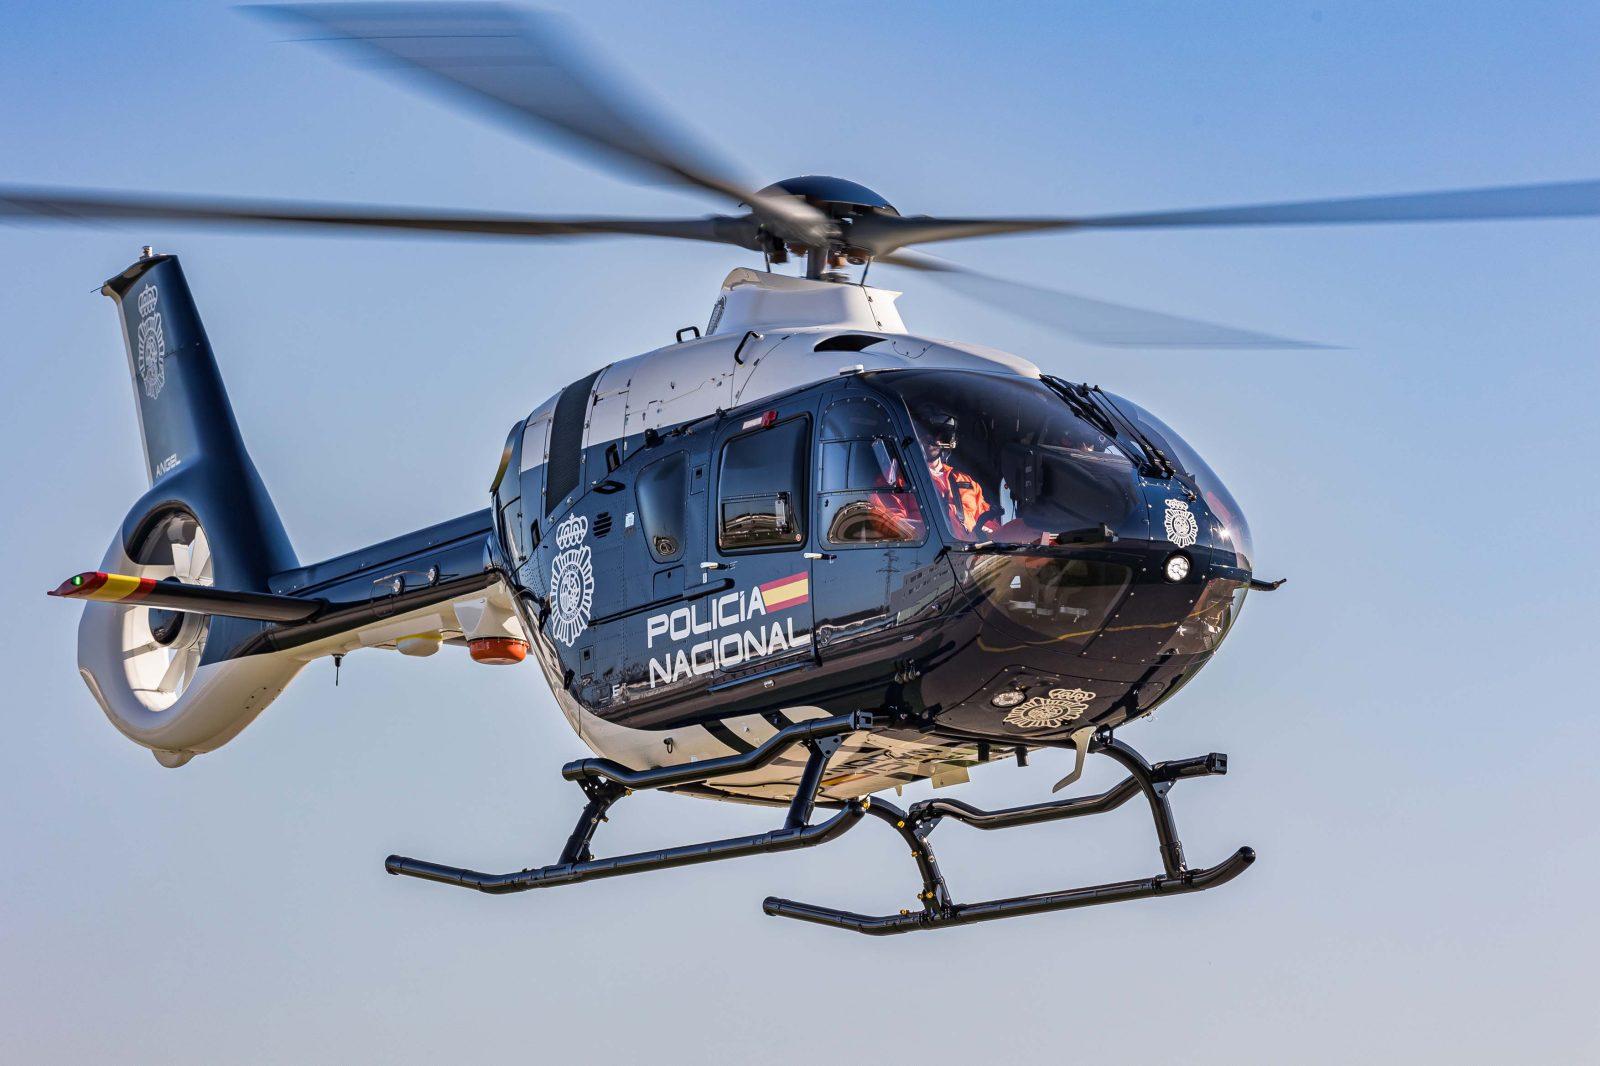 Airbus Delivers First Two H135s to the Spanish Ministry of Interior